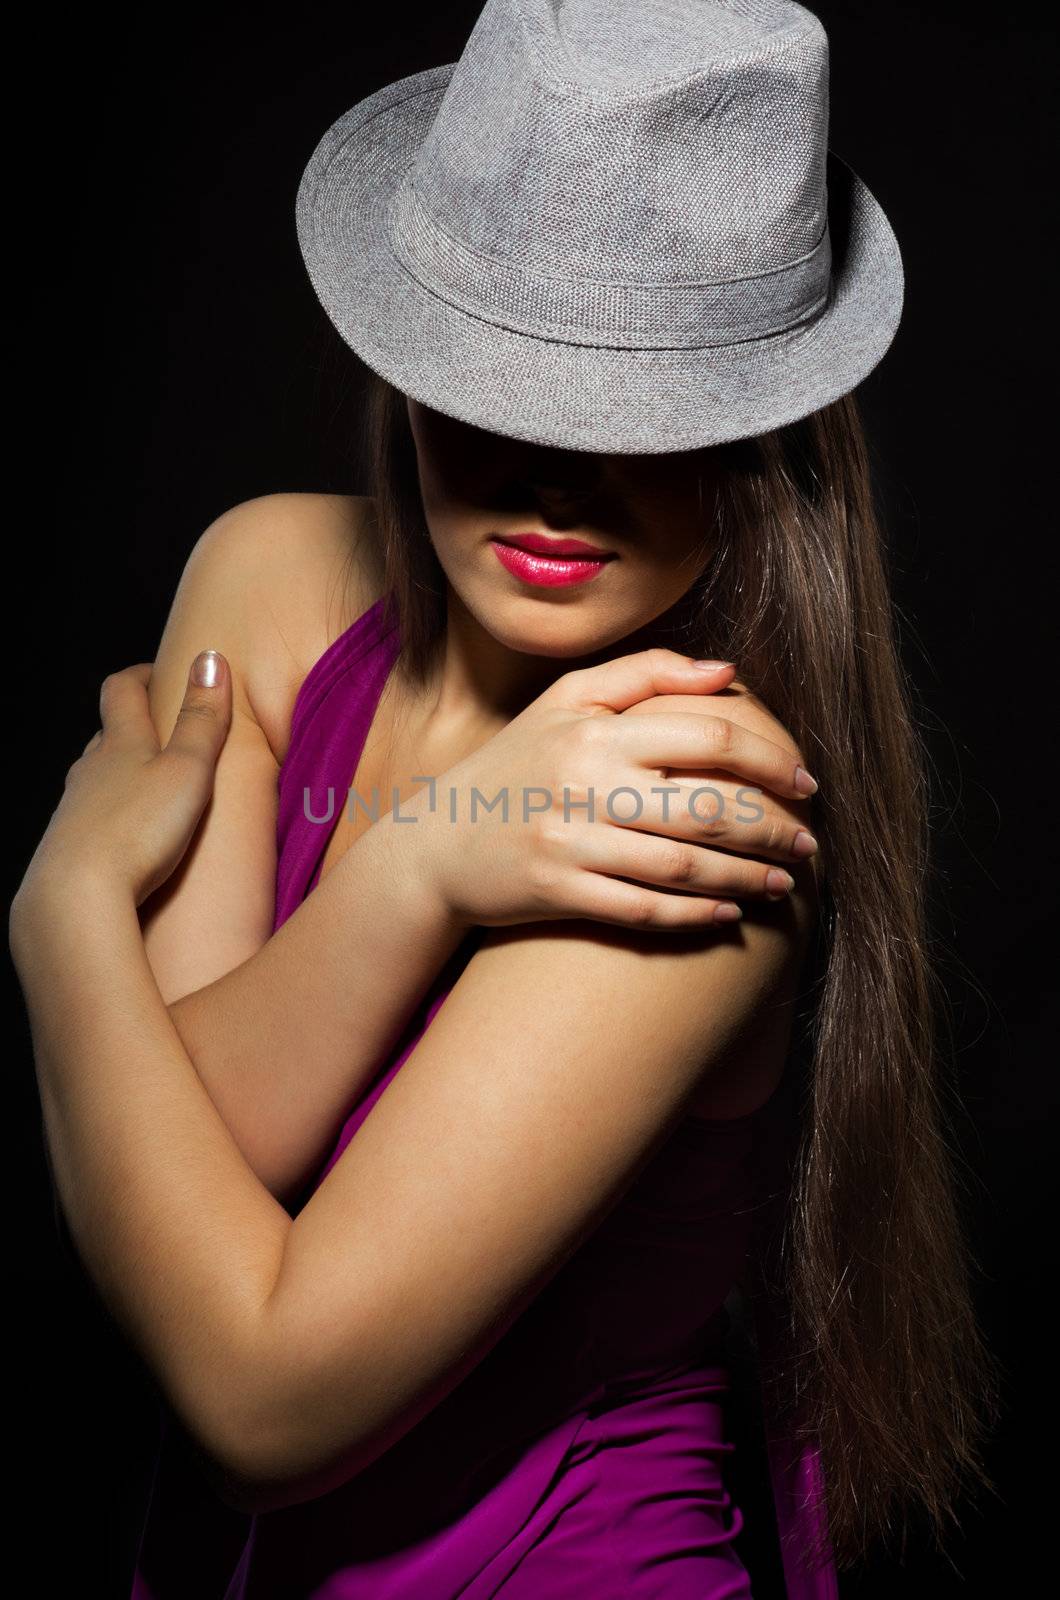 Fashion portrait of young woman by rbv